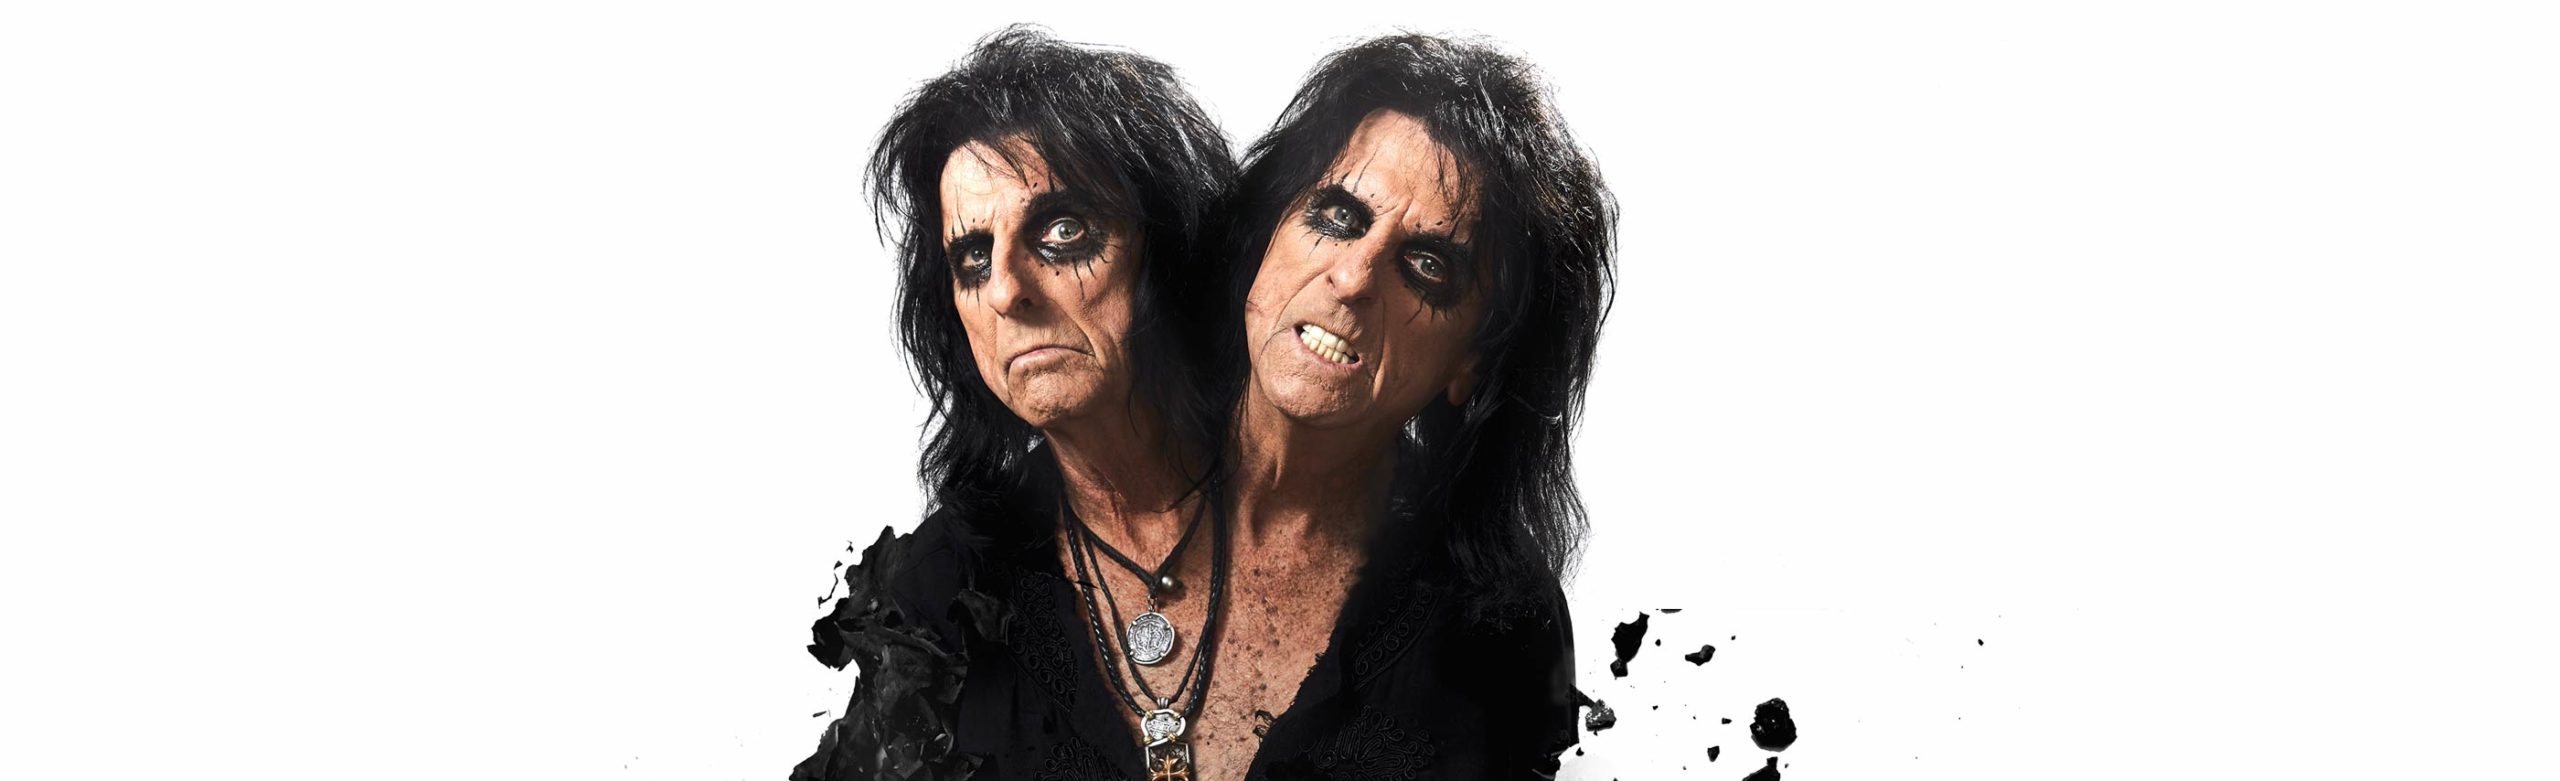 JUST ANNOUNCED: The Godfather of Shock Rock Alice Cooper Will Rock KettleHouse Amphitheater Image